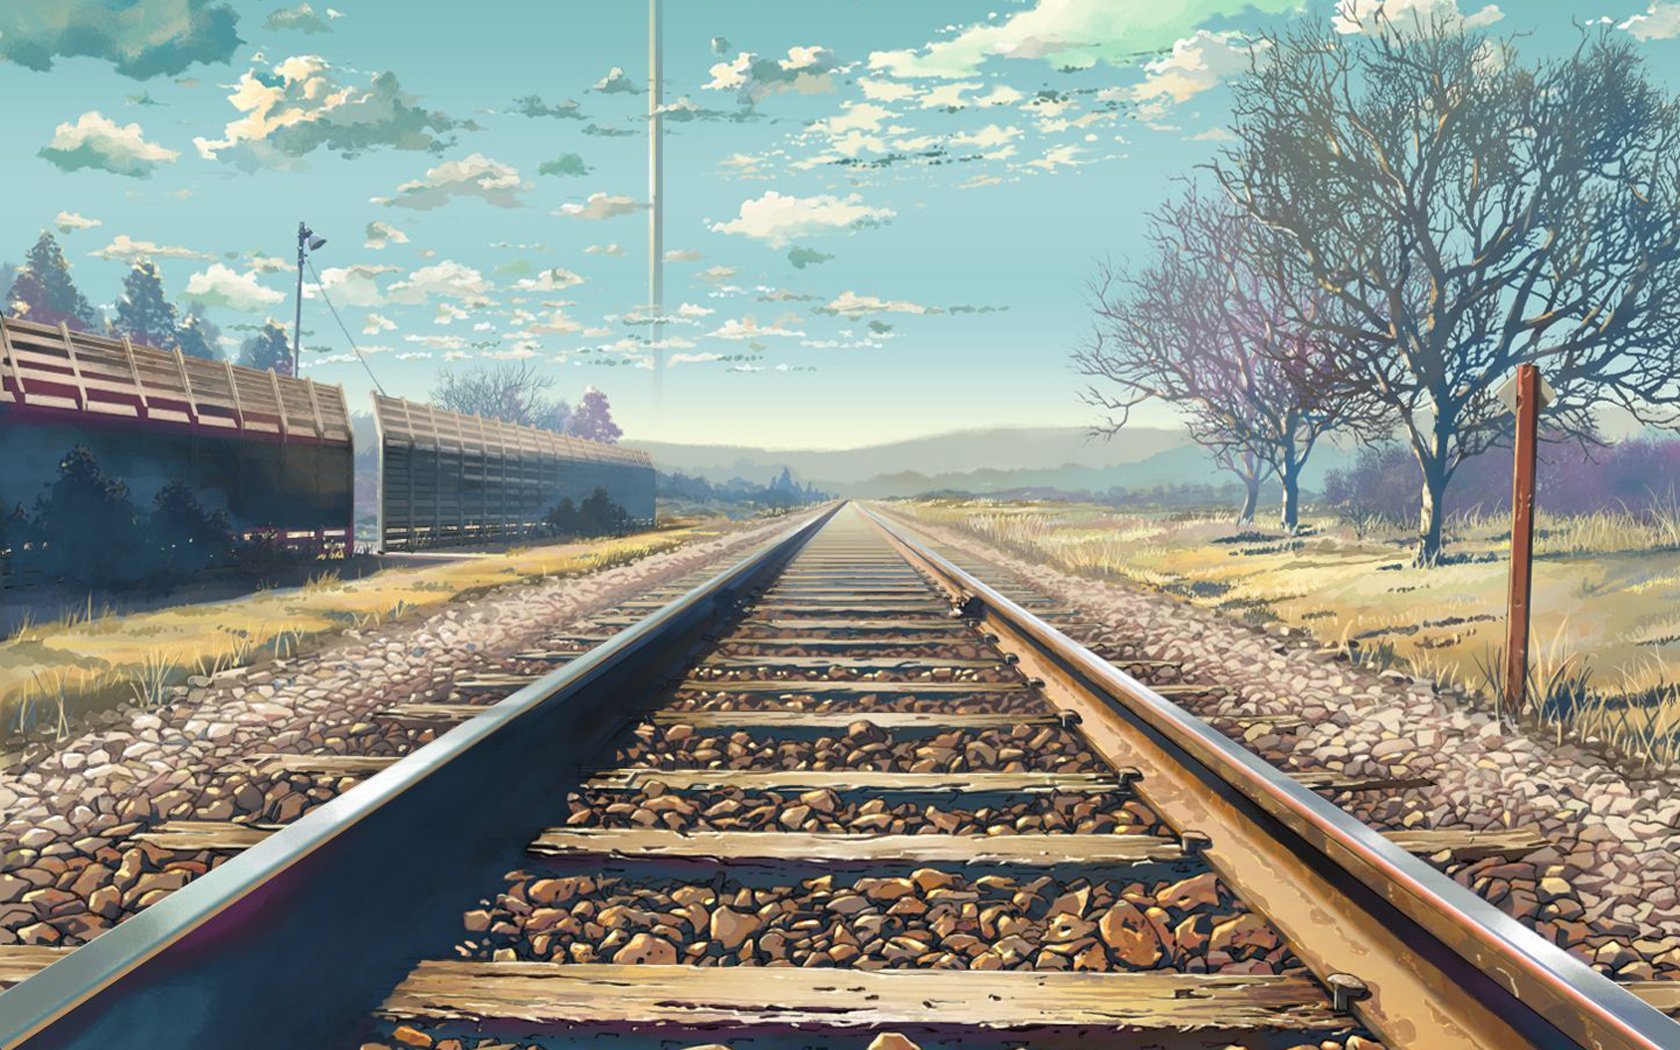 314 Railroad HD Wallpapers | Background